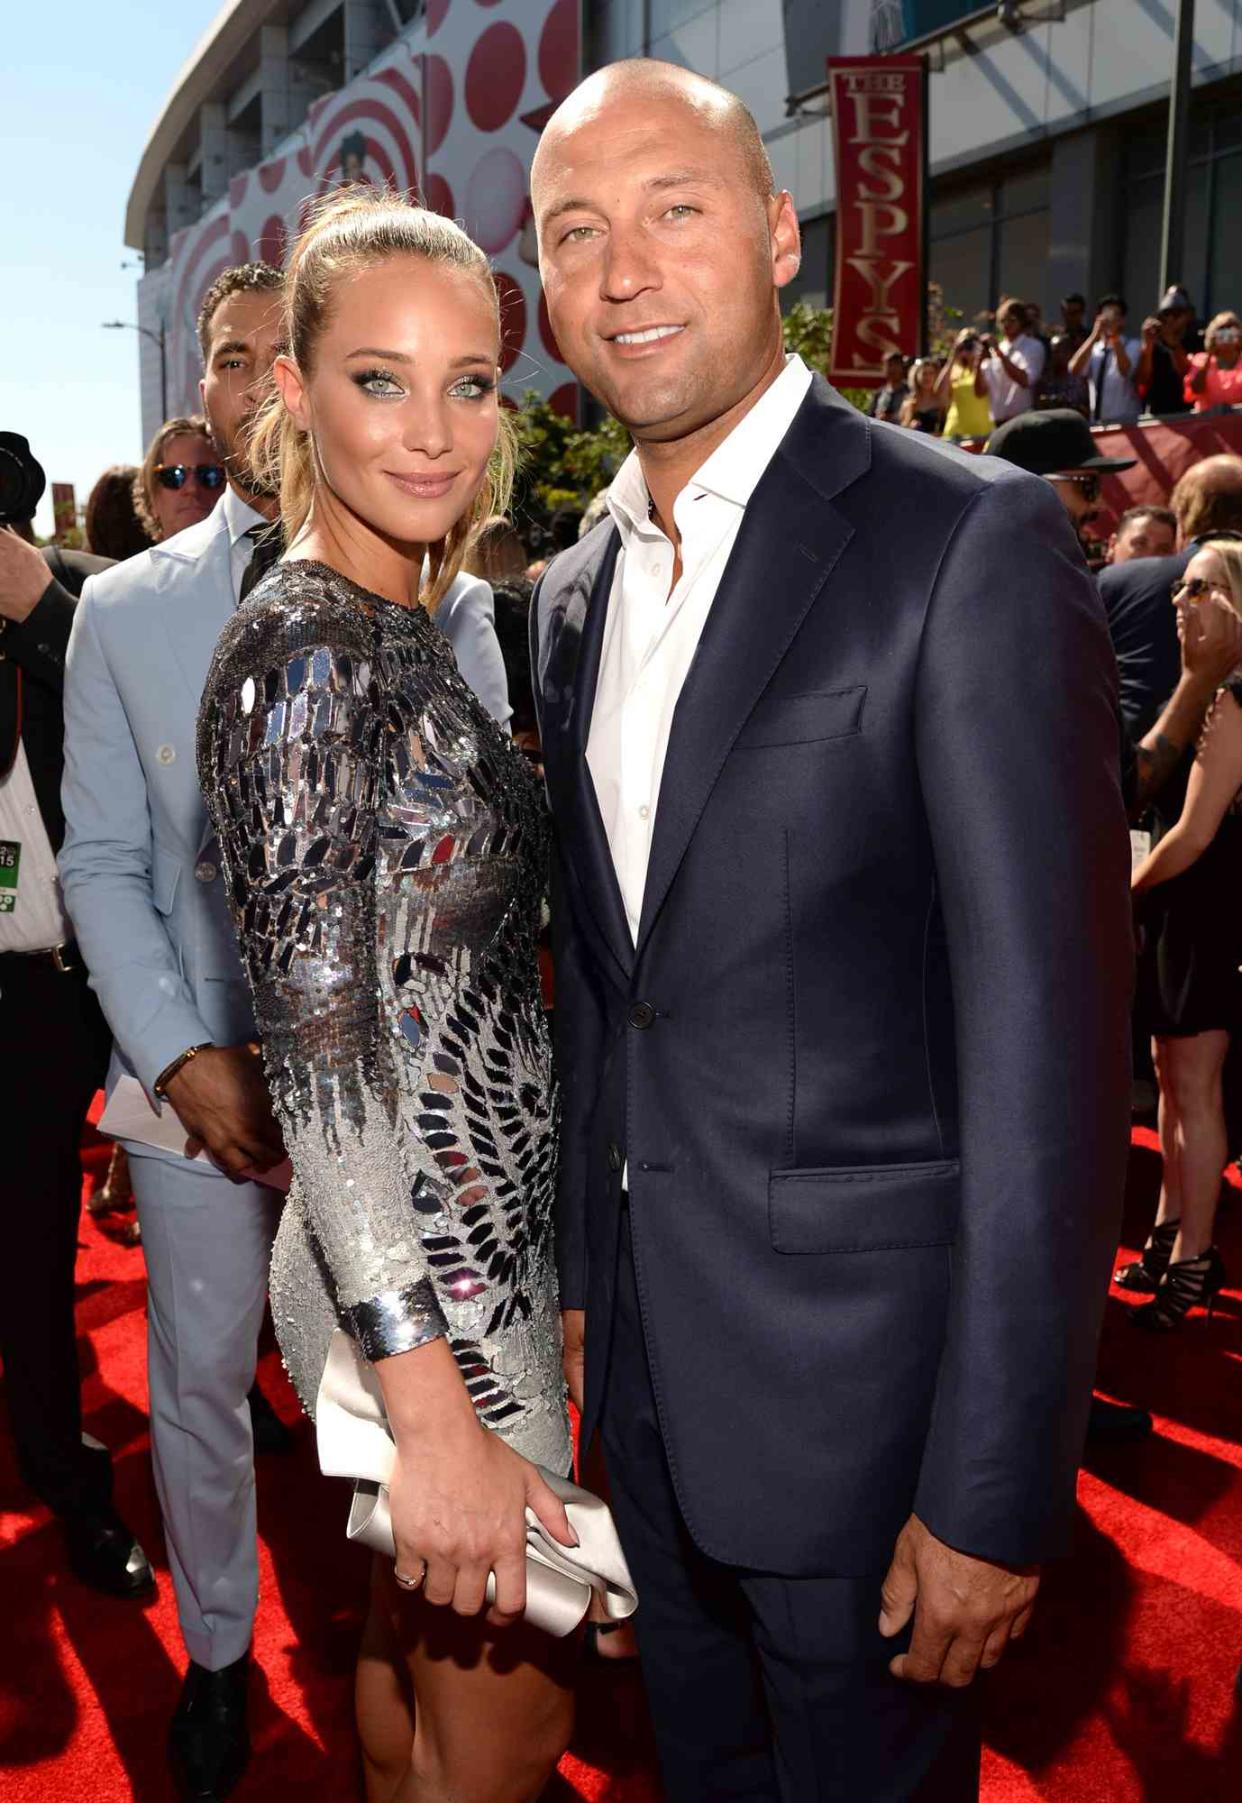 Hannah Davis with former MLB player Derek Jeter attend The 2015 ESPYS at Microsoft Theater on July 15, 2015 in Los Angeles, California